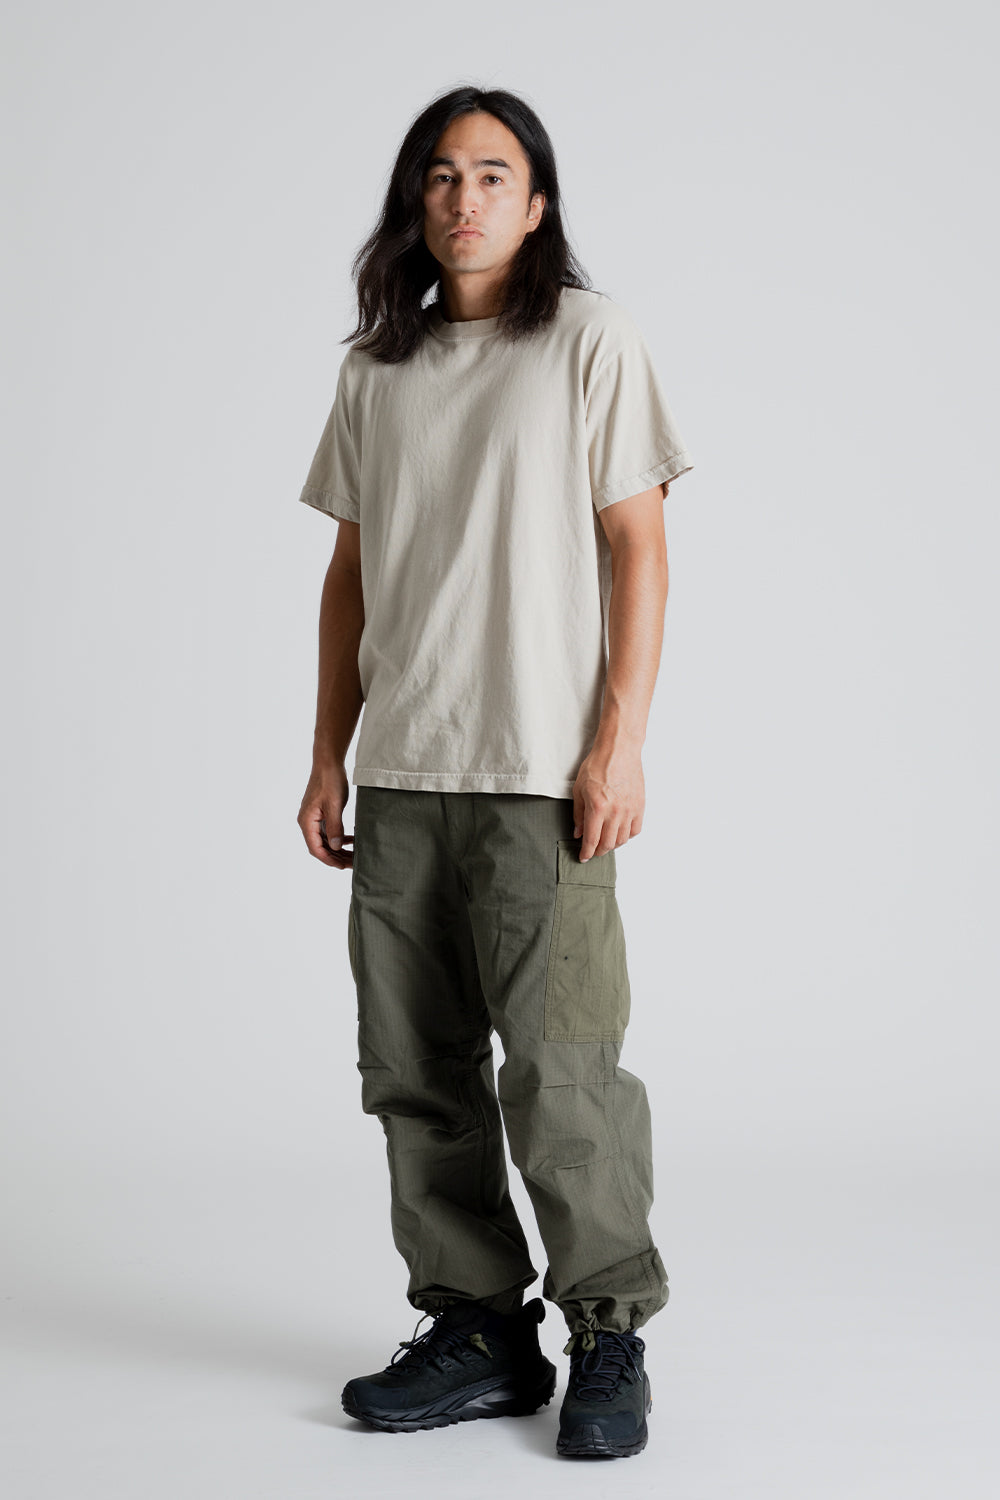 Lite Year Classic Fit Short Sleeve Tee in Natural